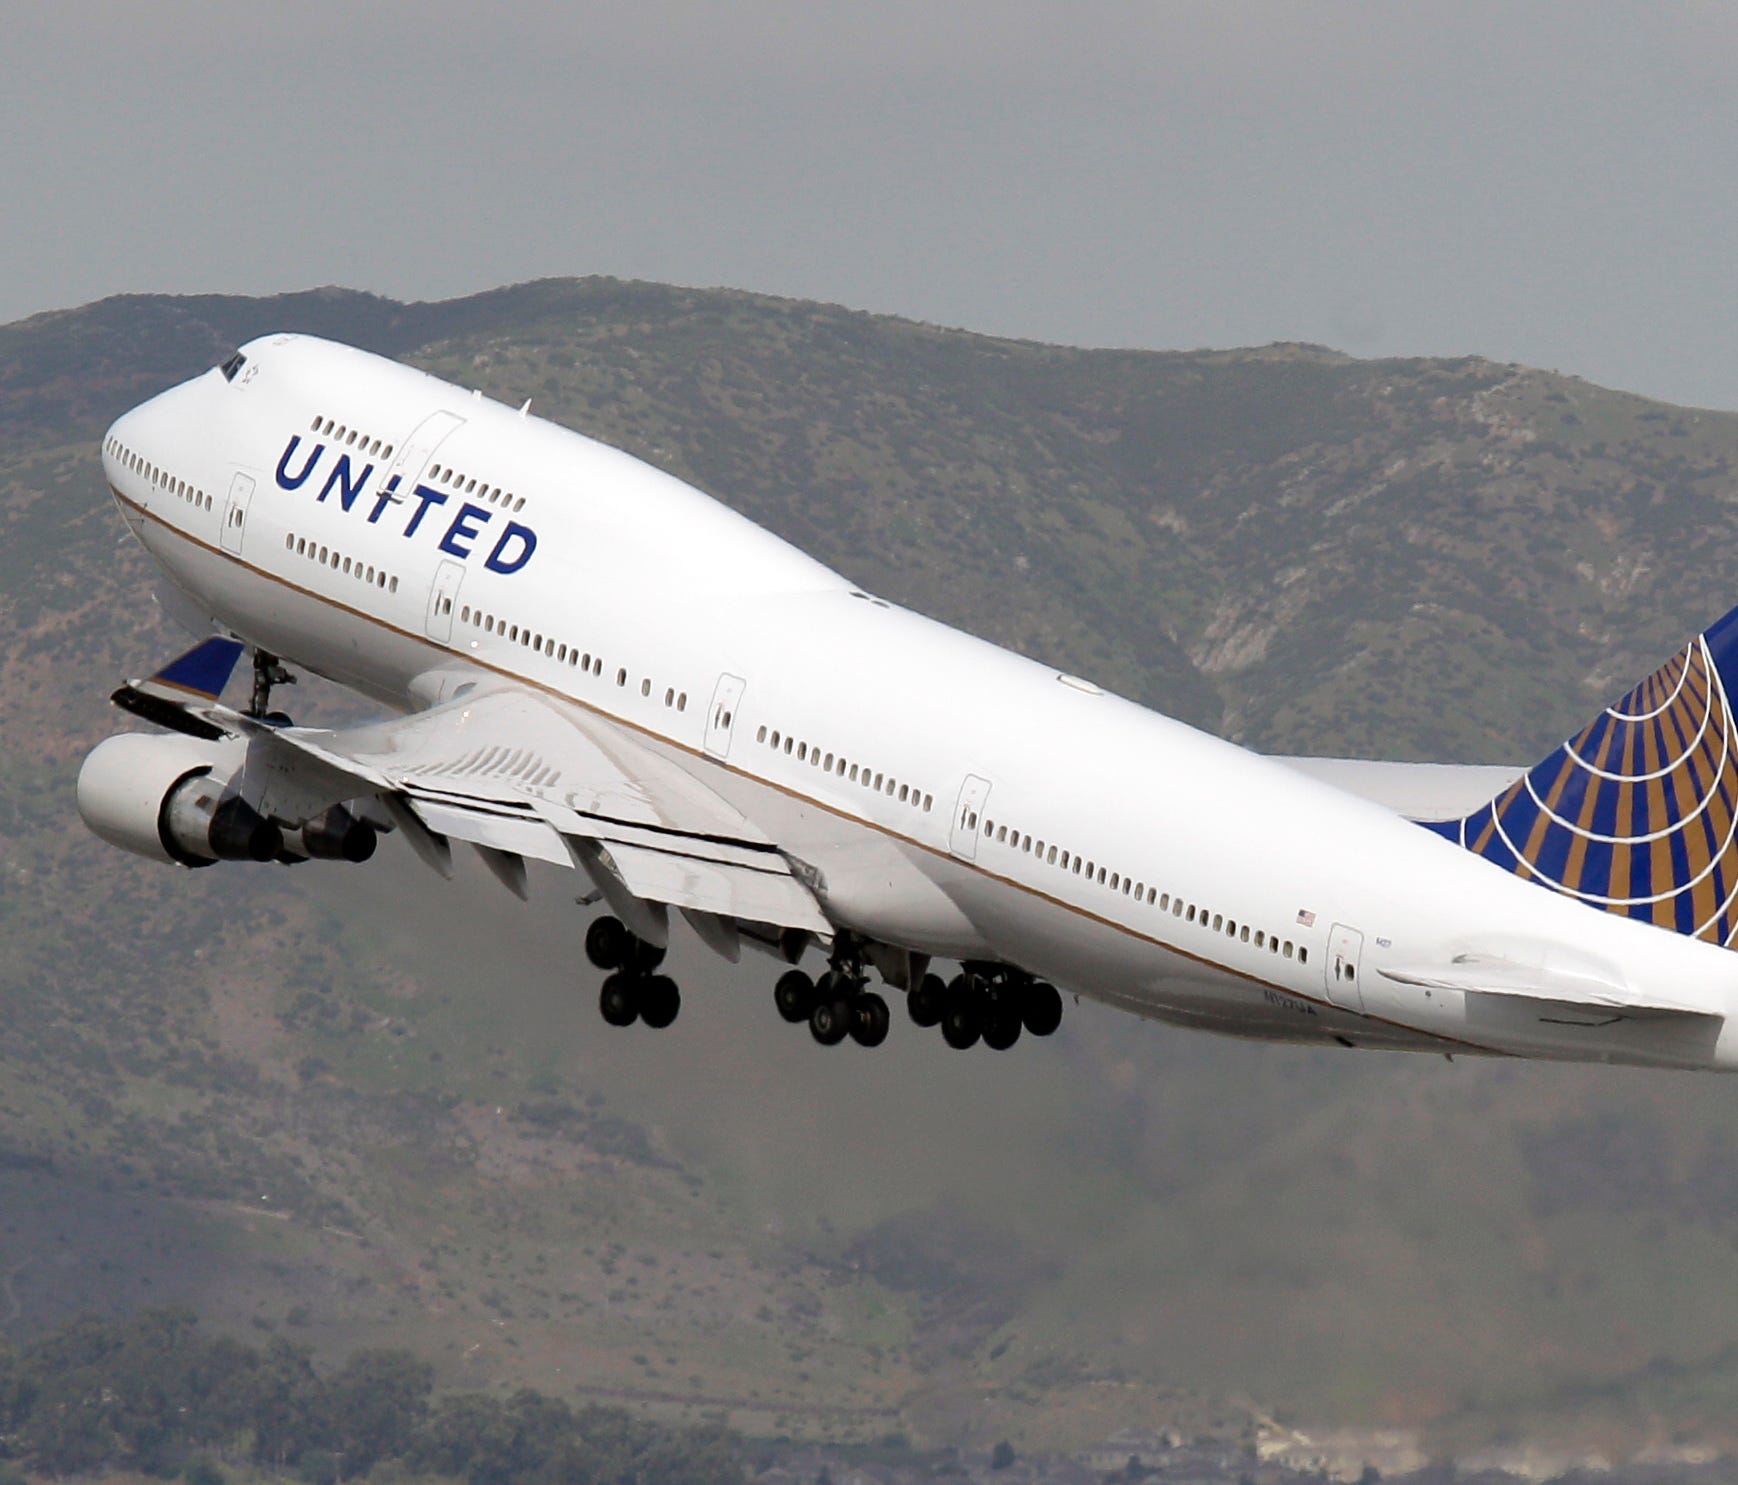 United Airlines 747-400, the first Boeing 747 entering service in the new United livery, takes off for South Korea from San Francisco International Airport on Feb. 23, 2011.